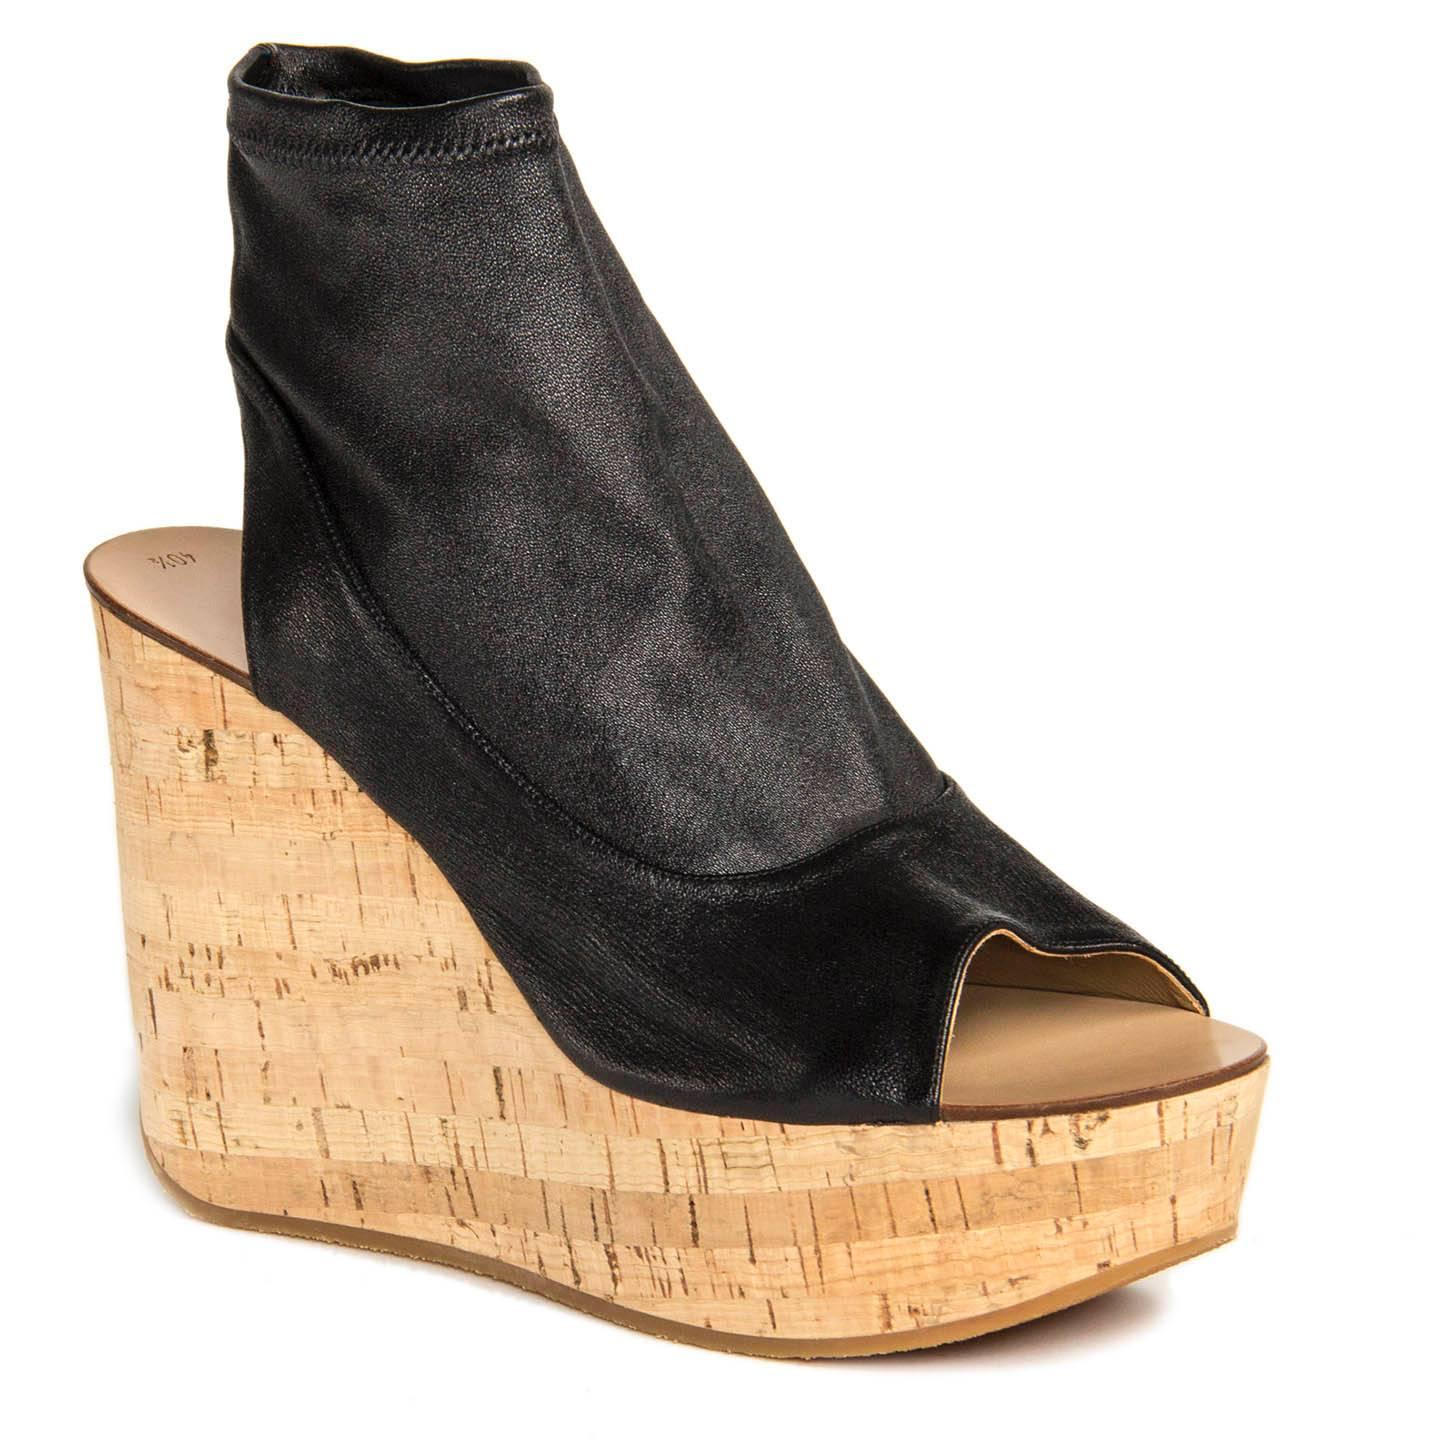 Black leather glove cork wedges with gum soles. The leather has an elegant round cut at front and sides. The cuff is elastic and it fits beautifully to the ankle, there is no instep zipper. Wedges heel: front 1.75